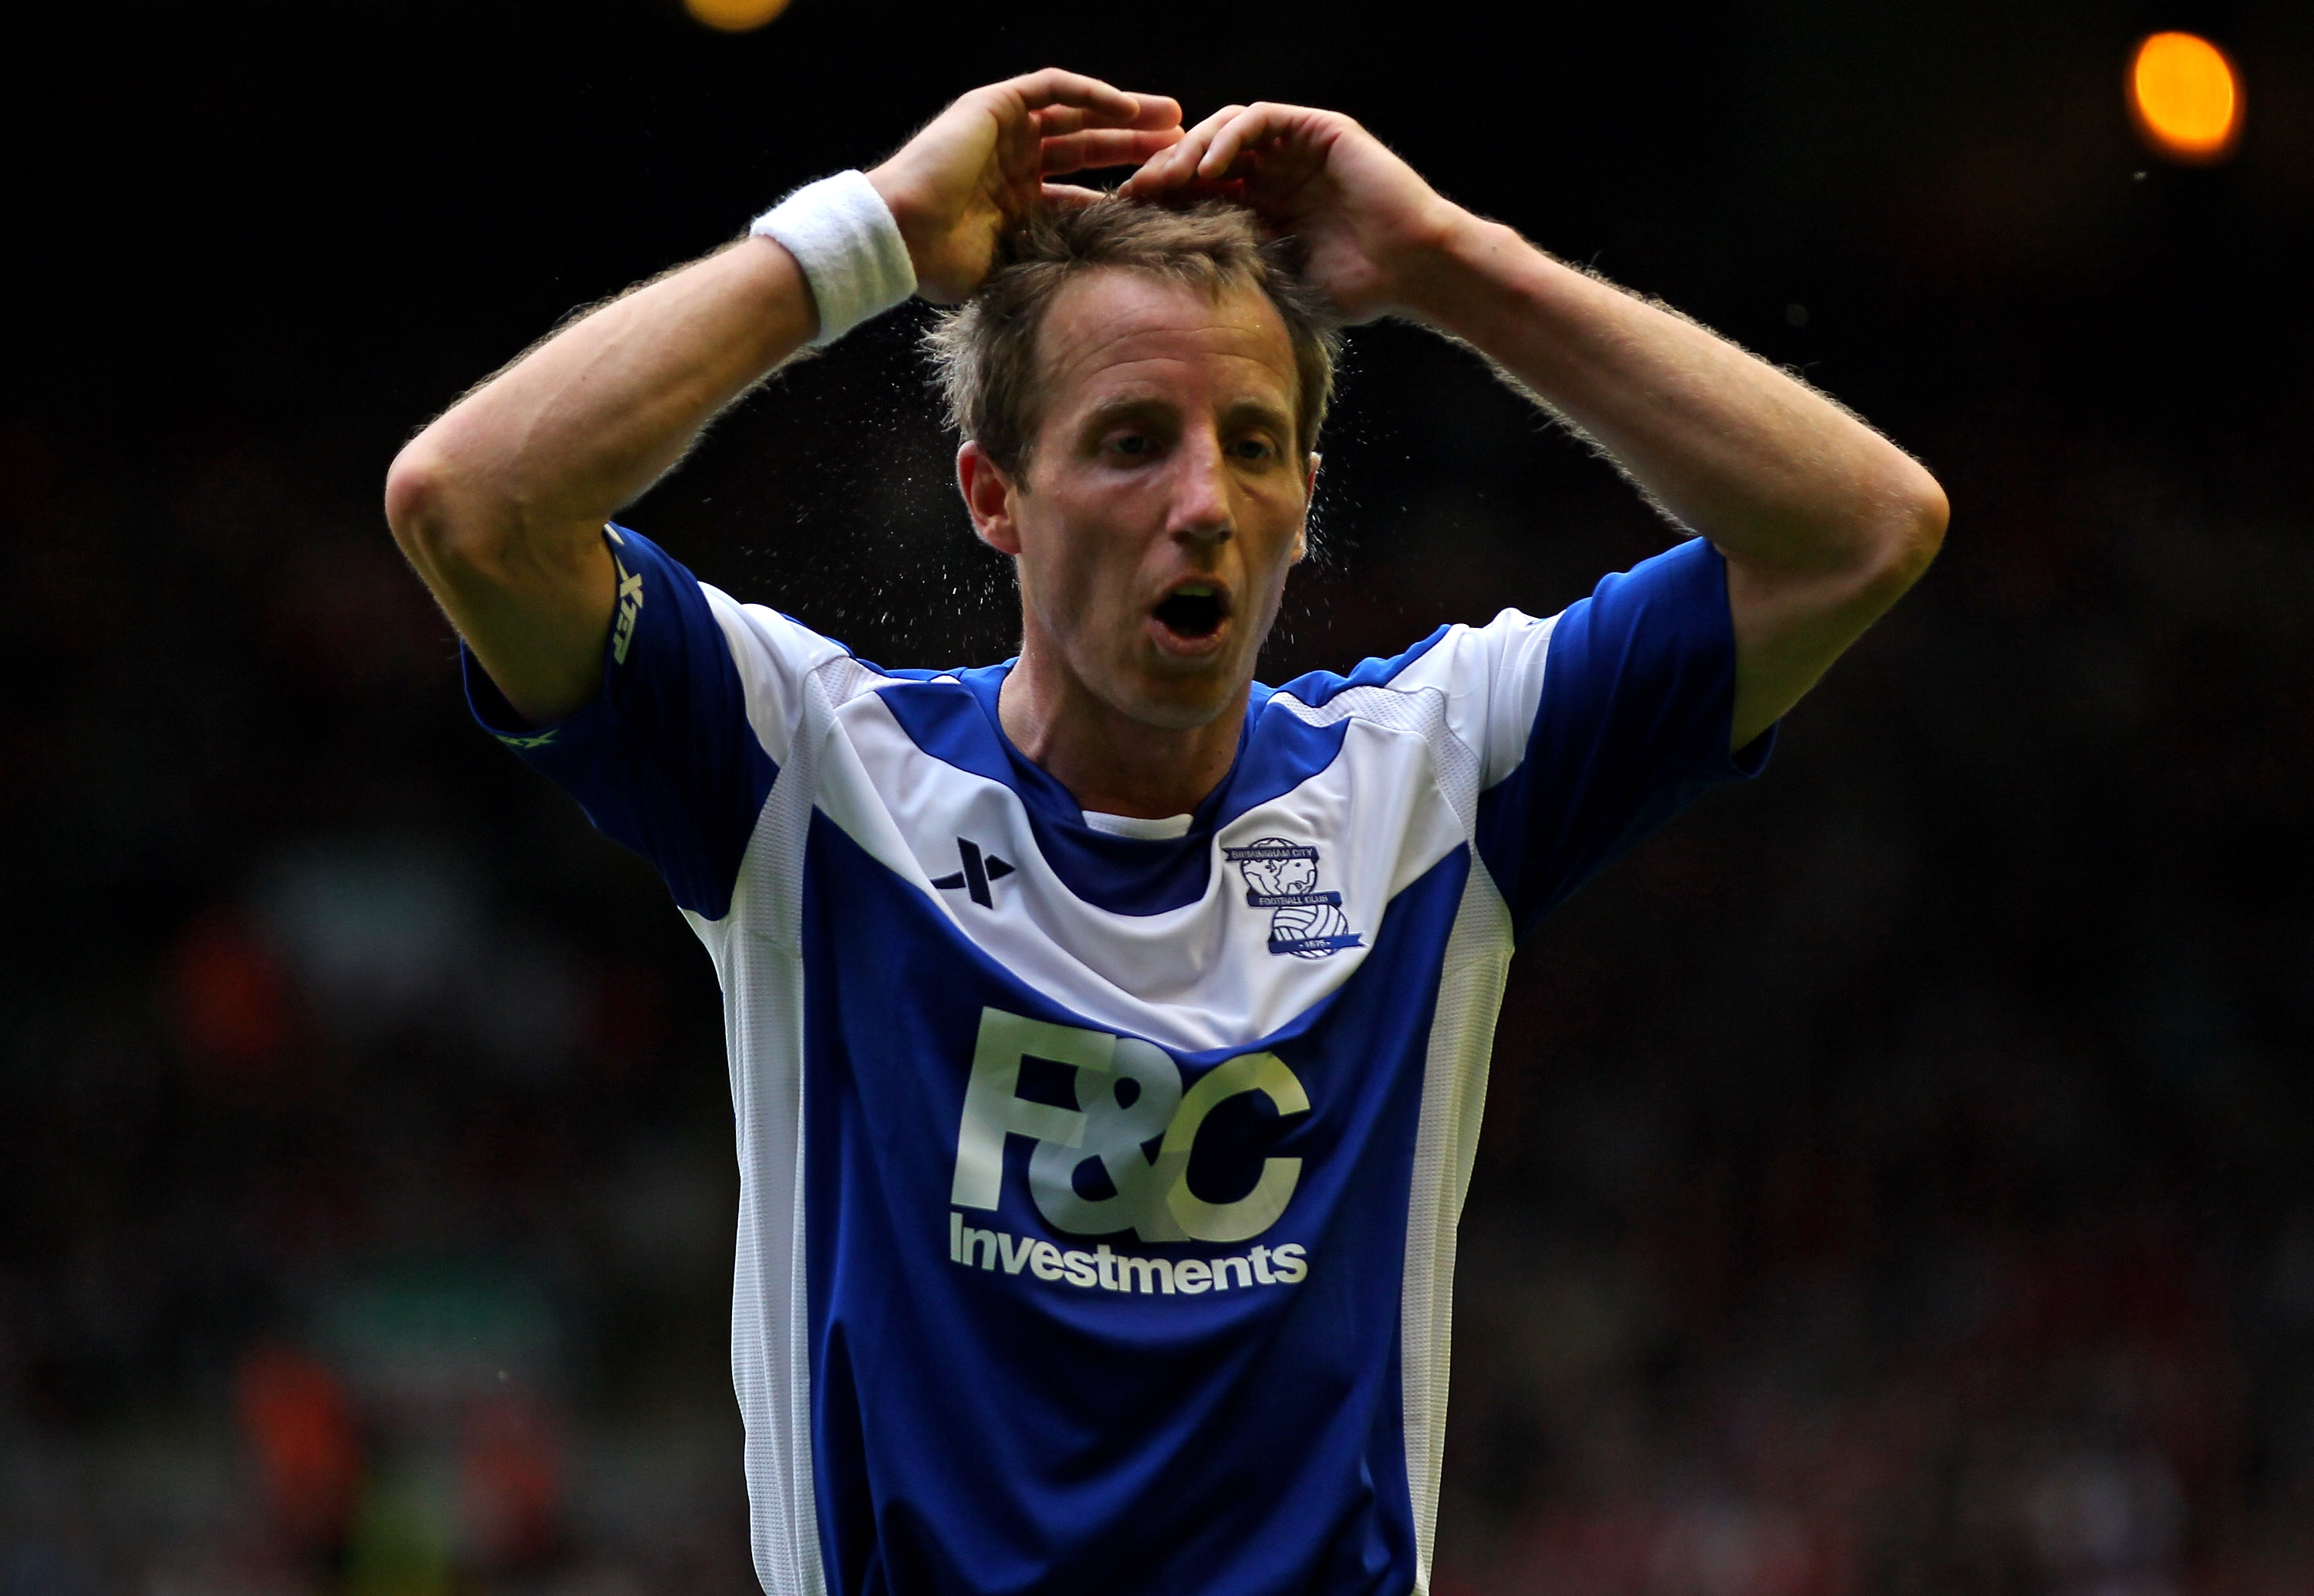 LIVERPOOL, ENGLAND - APRIL 23:  Lee Bowyer of Birmingham City shows his frustration during the Barclays Premier League match between Liverpool and Birmingham City at Anfield on April 23, 2011 in Liverpool, England.  (Photo by Clive Brunskill/Getty Images)